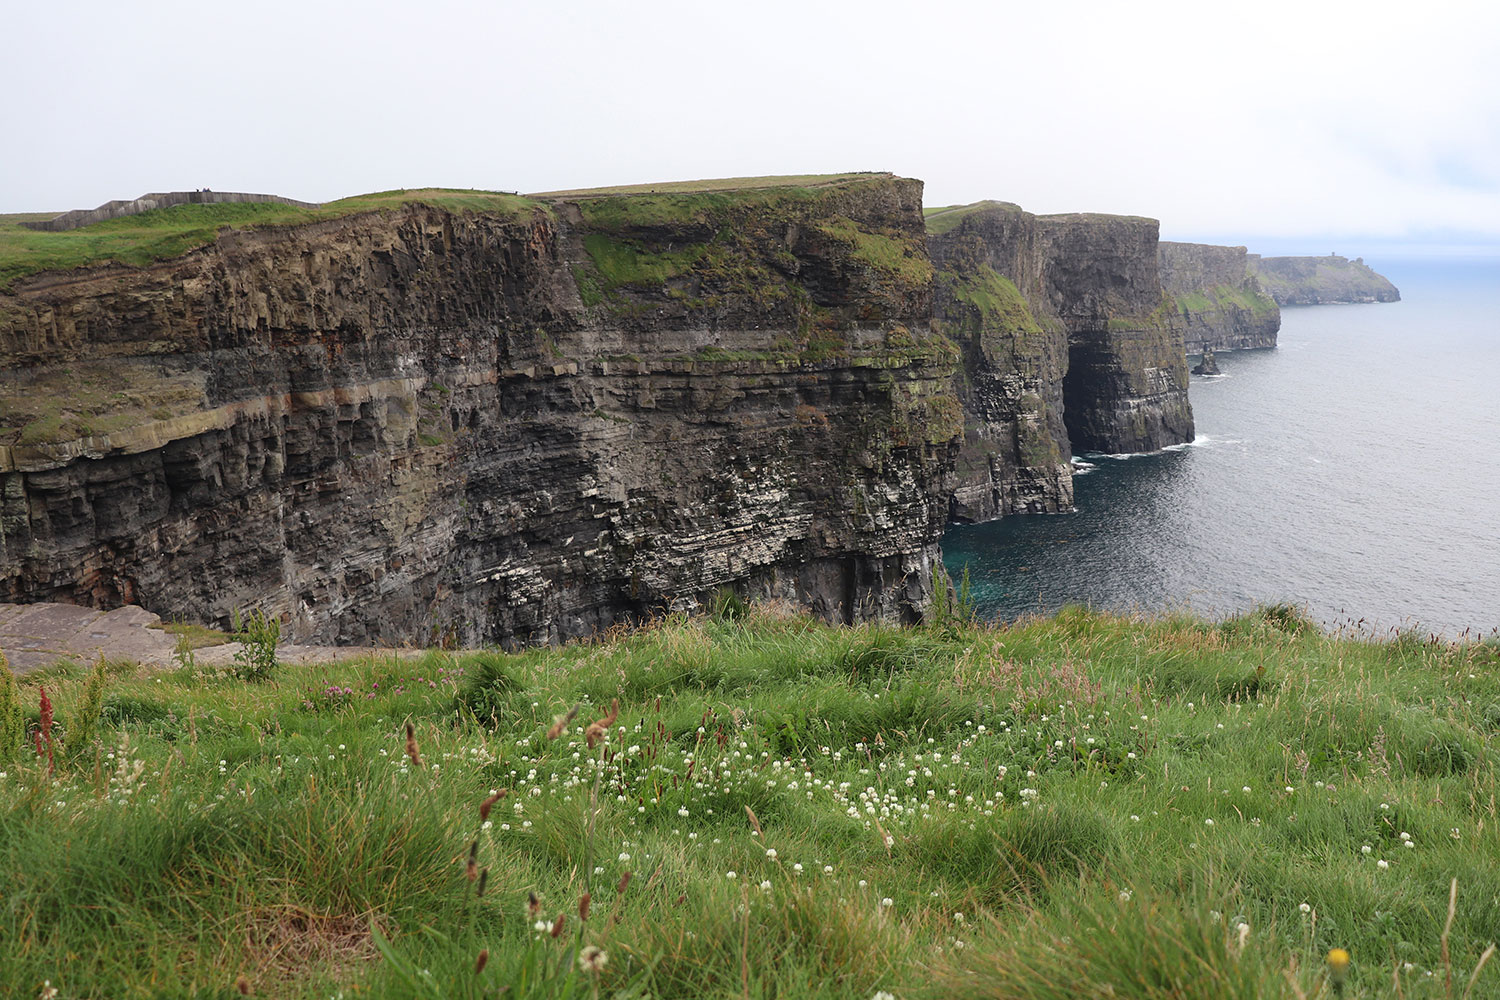 The Cliffs of Moher